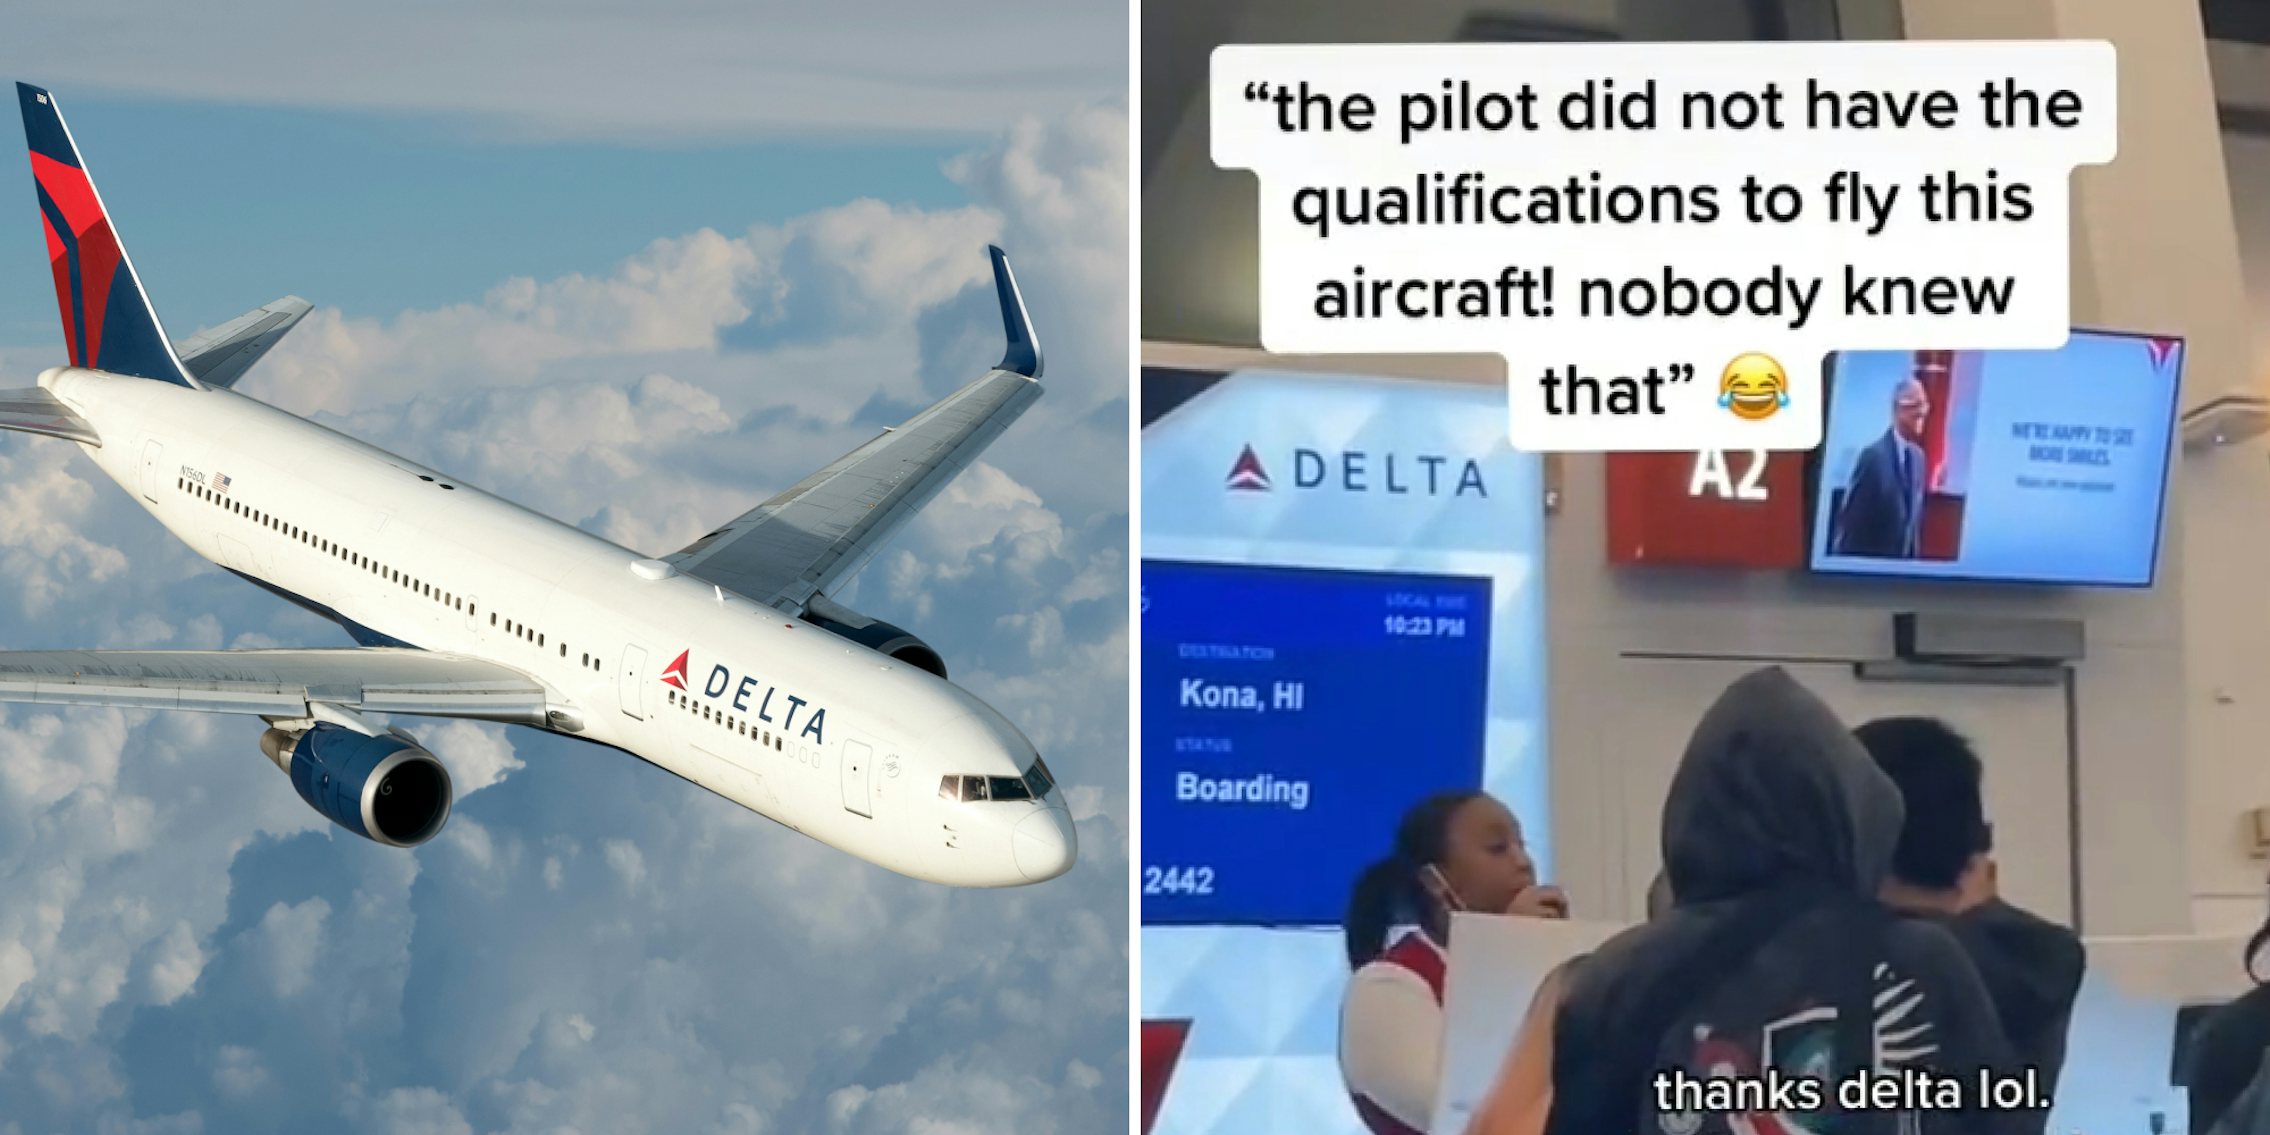 Delta airplane flying in clouds and blue sky (l) Delta employee behind counter speaking into microphone caption ''the pilot did not have the qualifications to fly this aircraft! nobody knew that'' 'thanks delta lol.' (r)